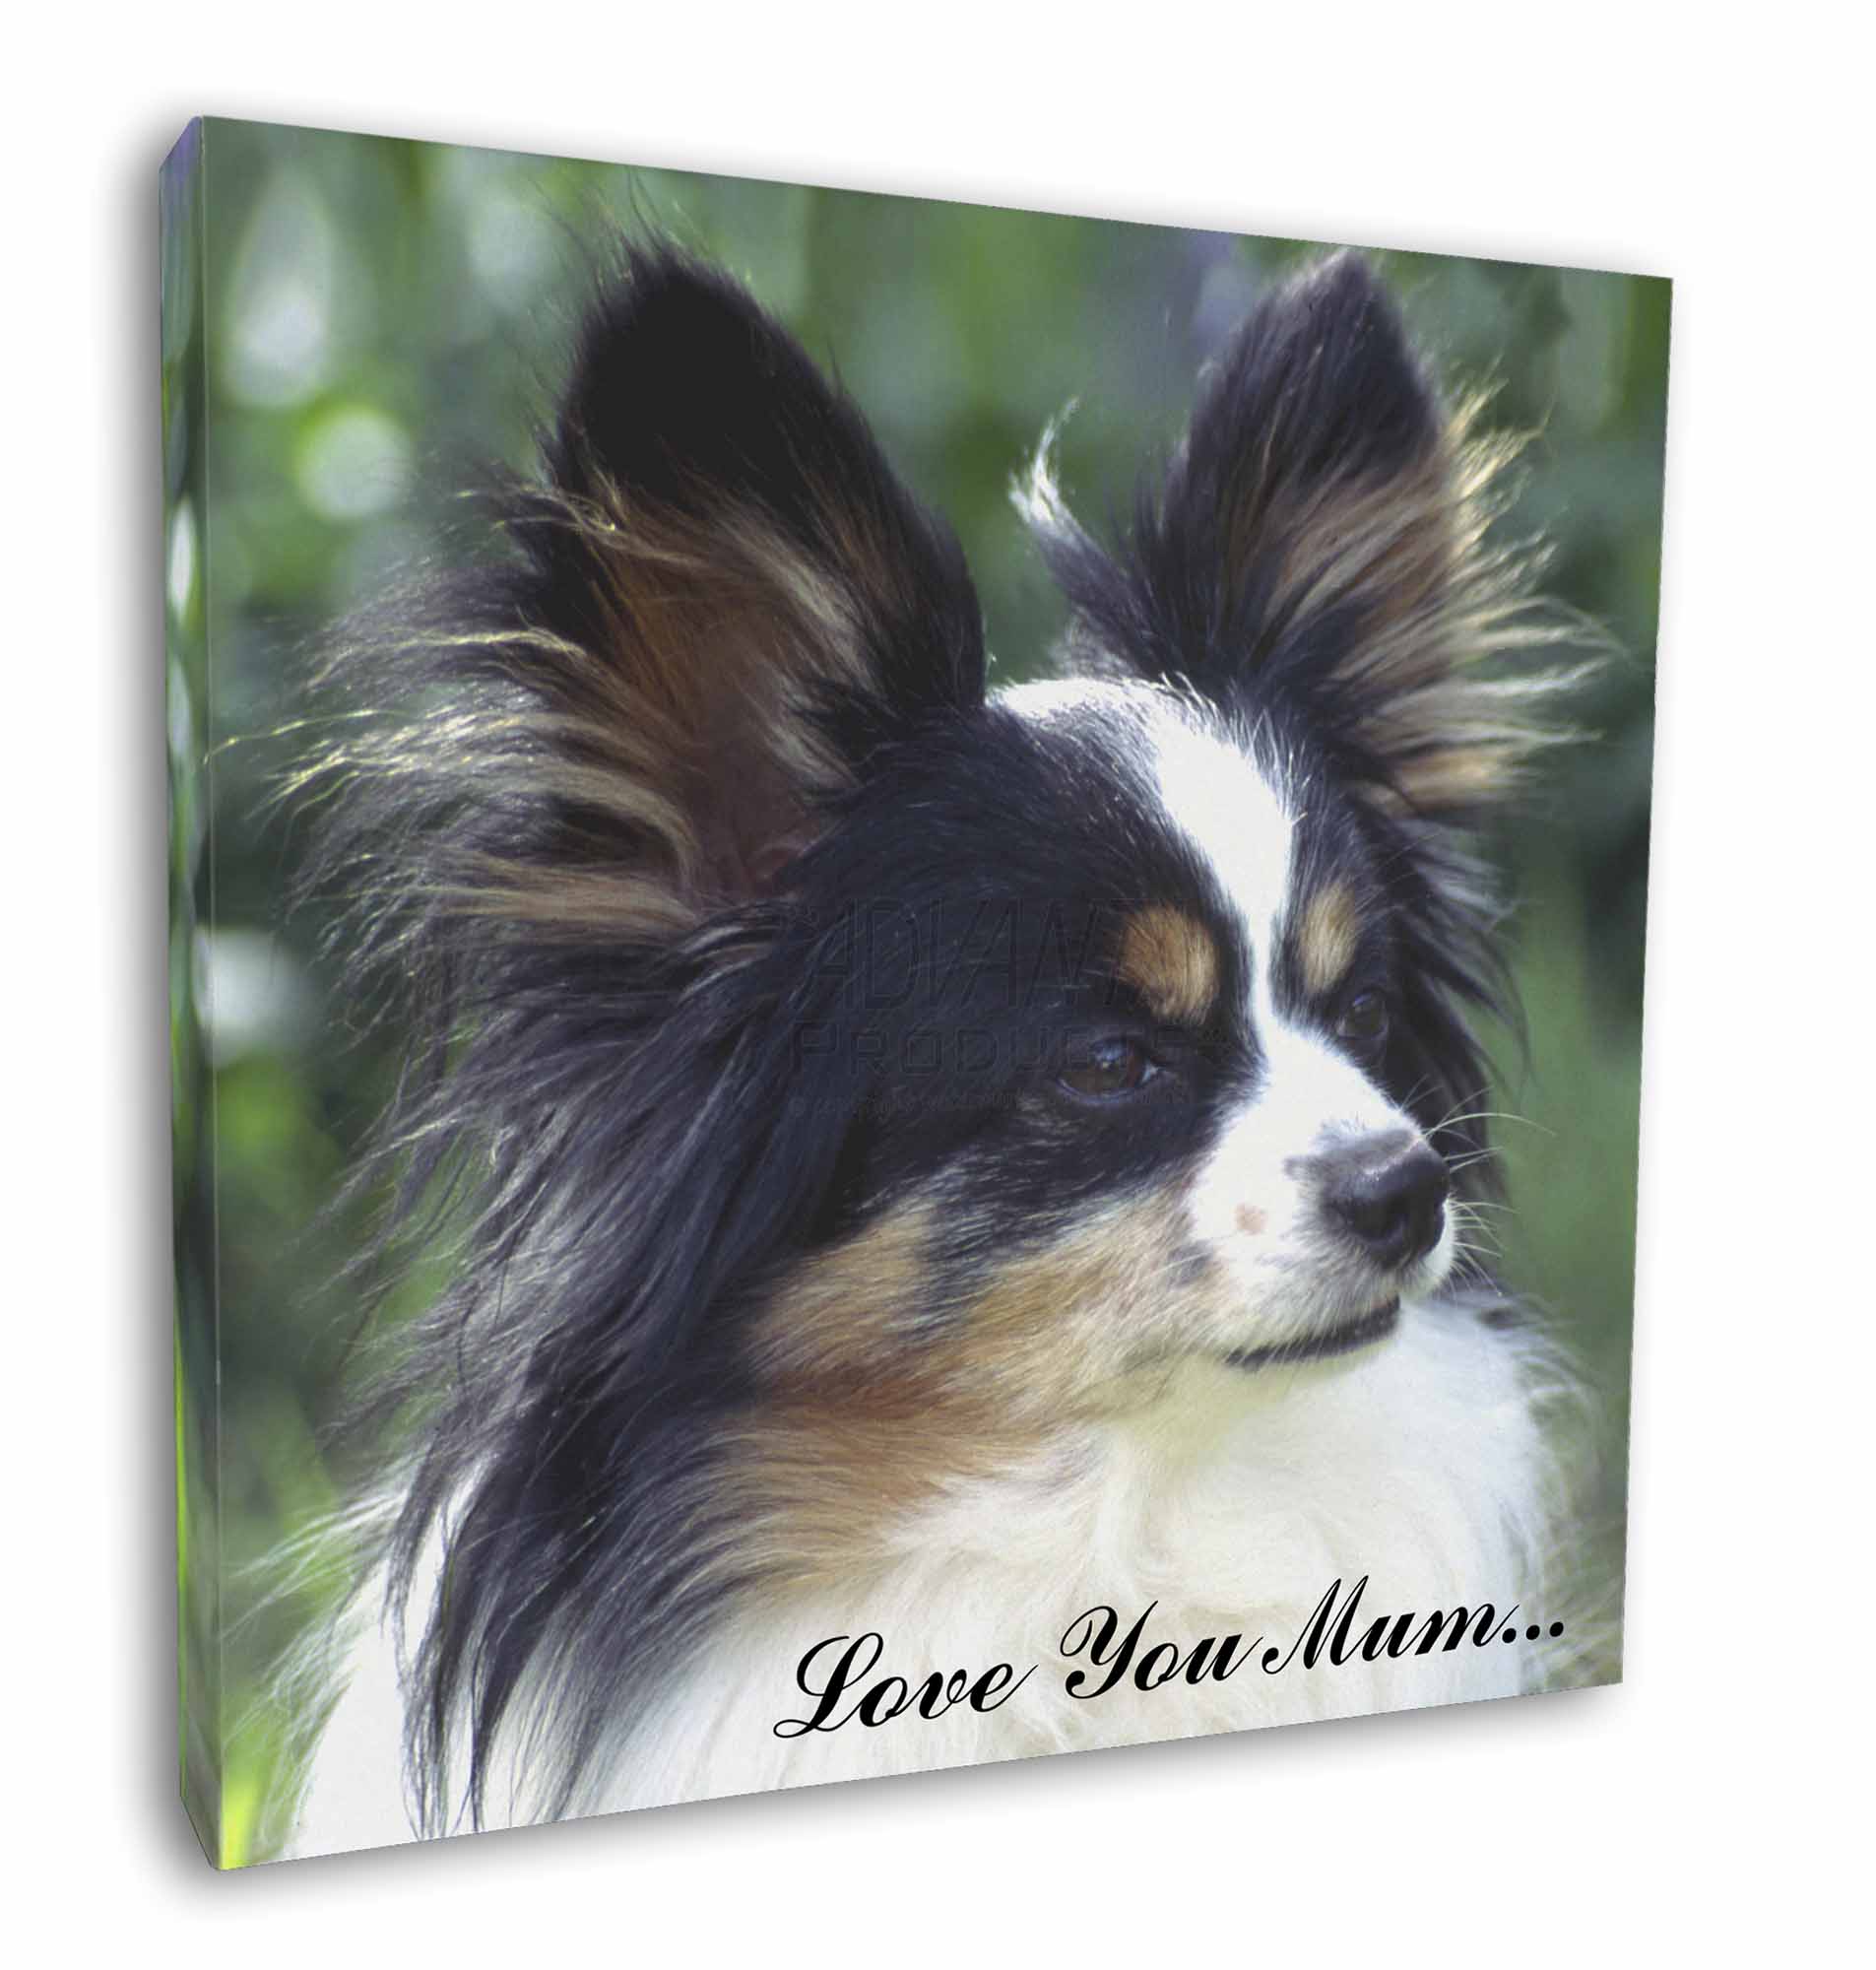 Papillon Dog Fridge Magnet I have the BEST MUM IN THE WORLD by Starprint 